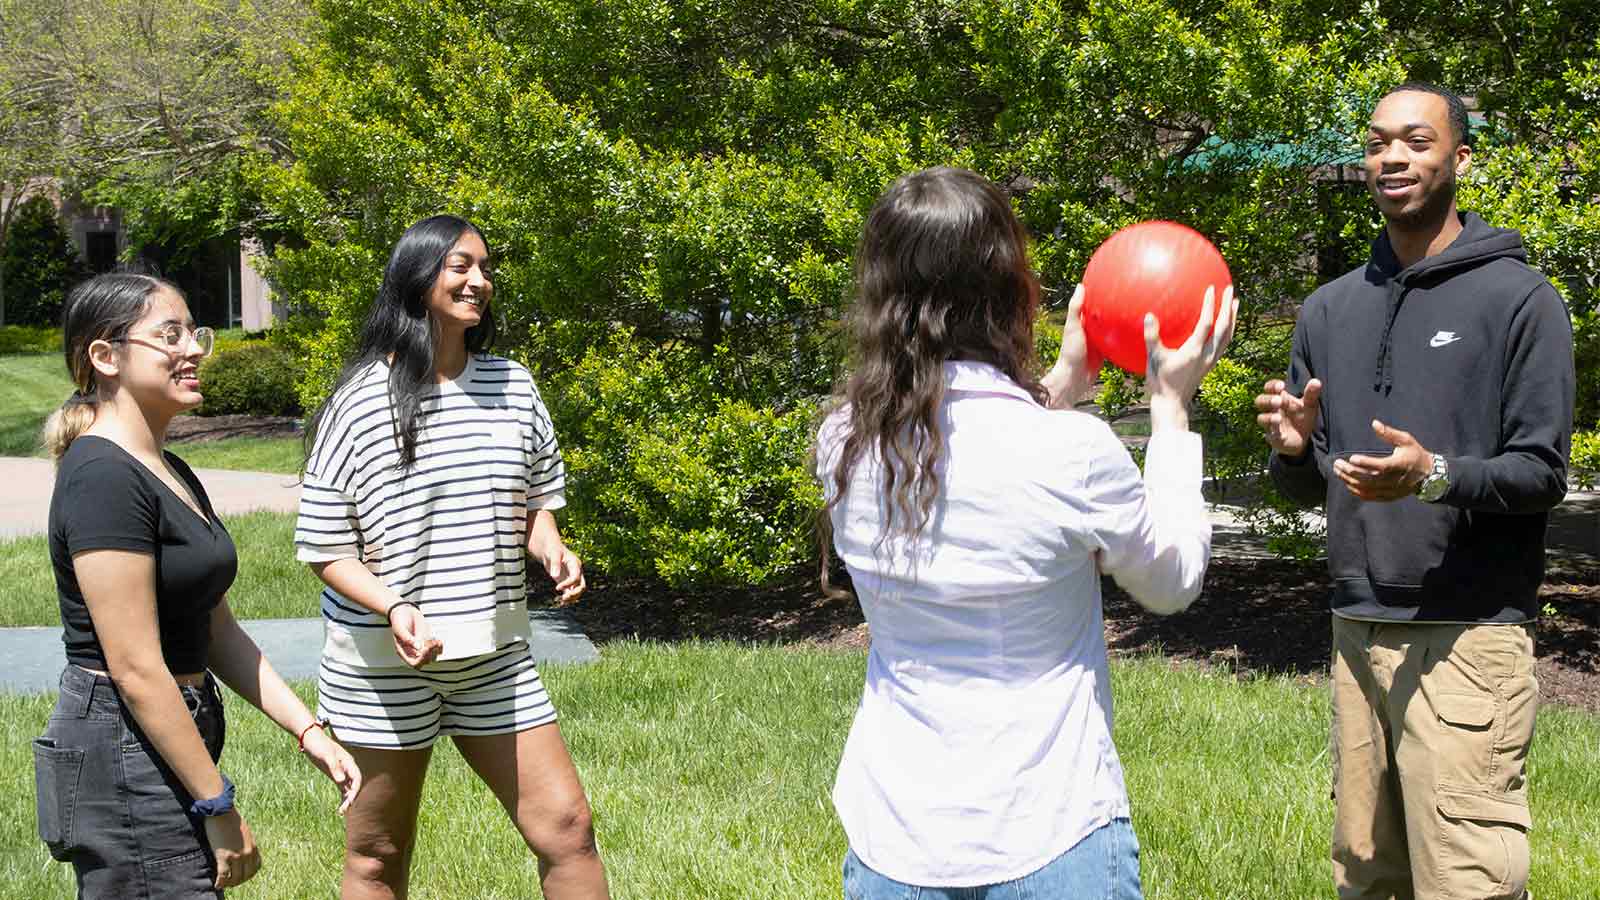 Four young adults having fun outside throwing around a ball.